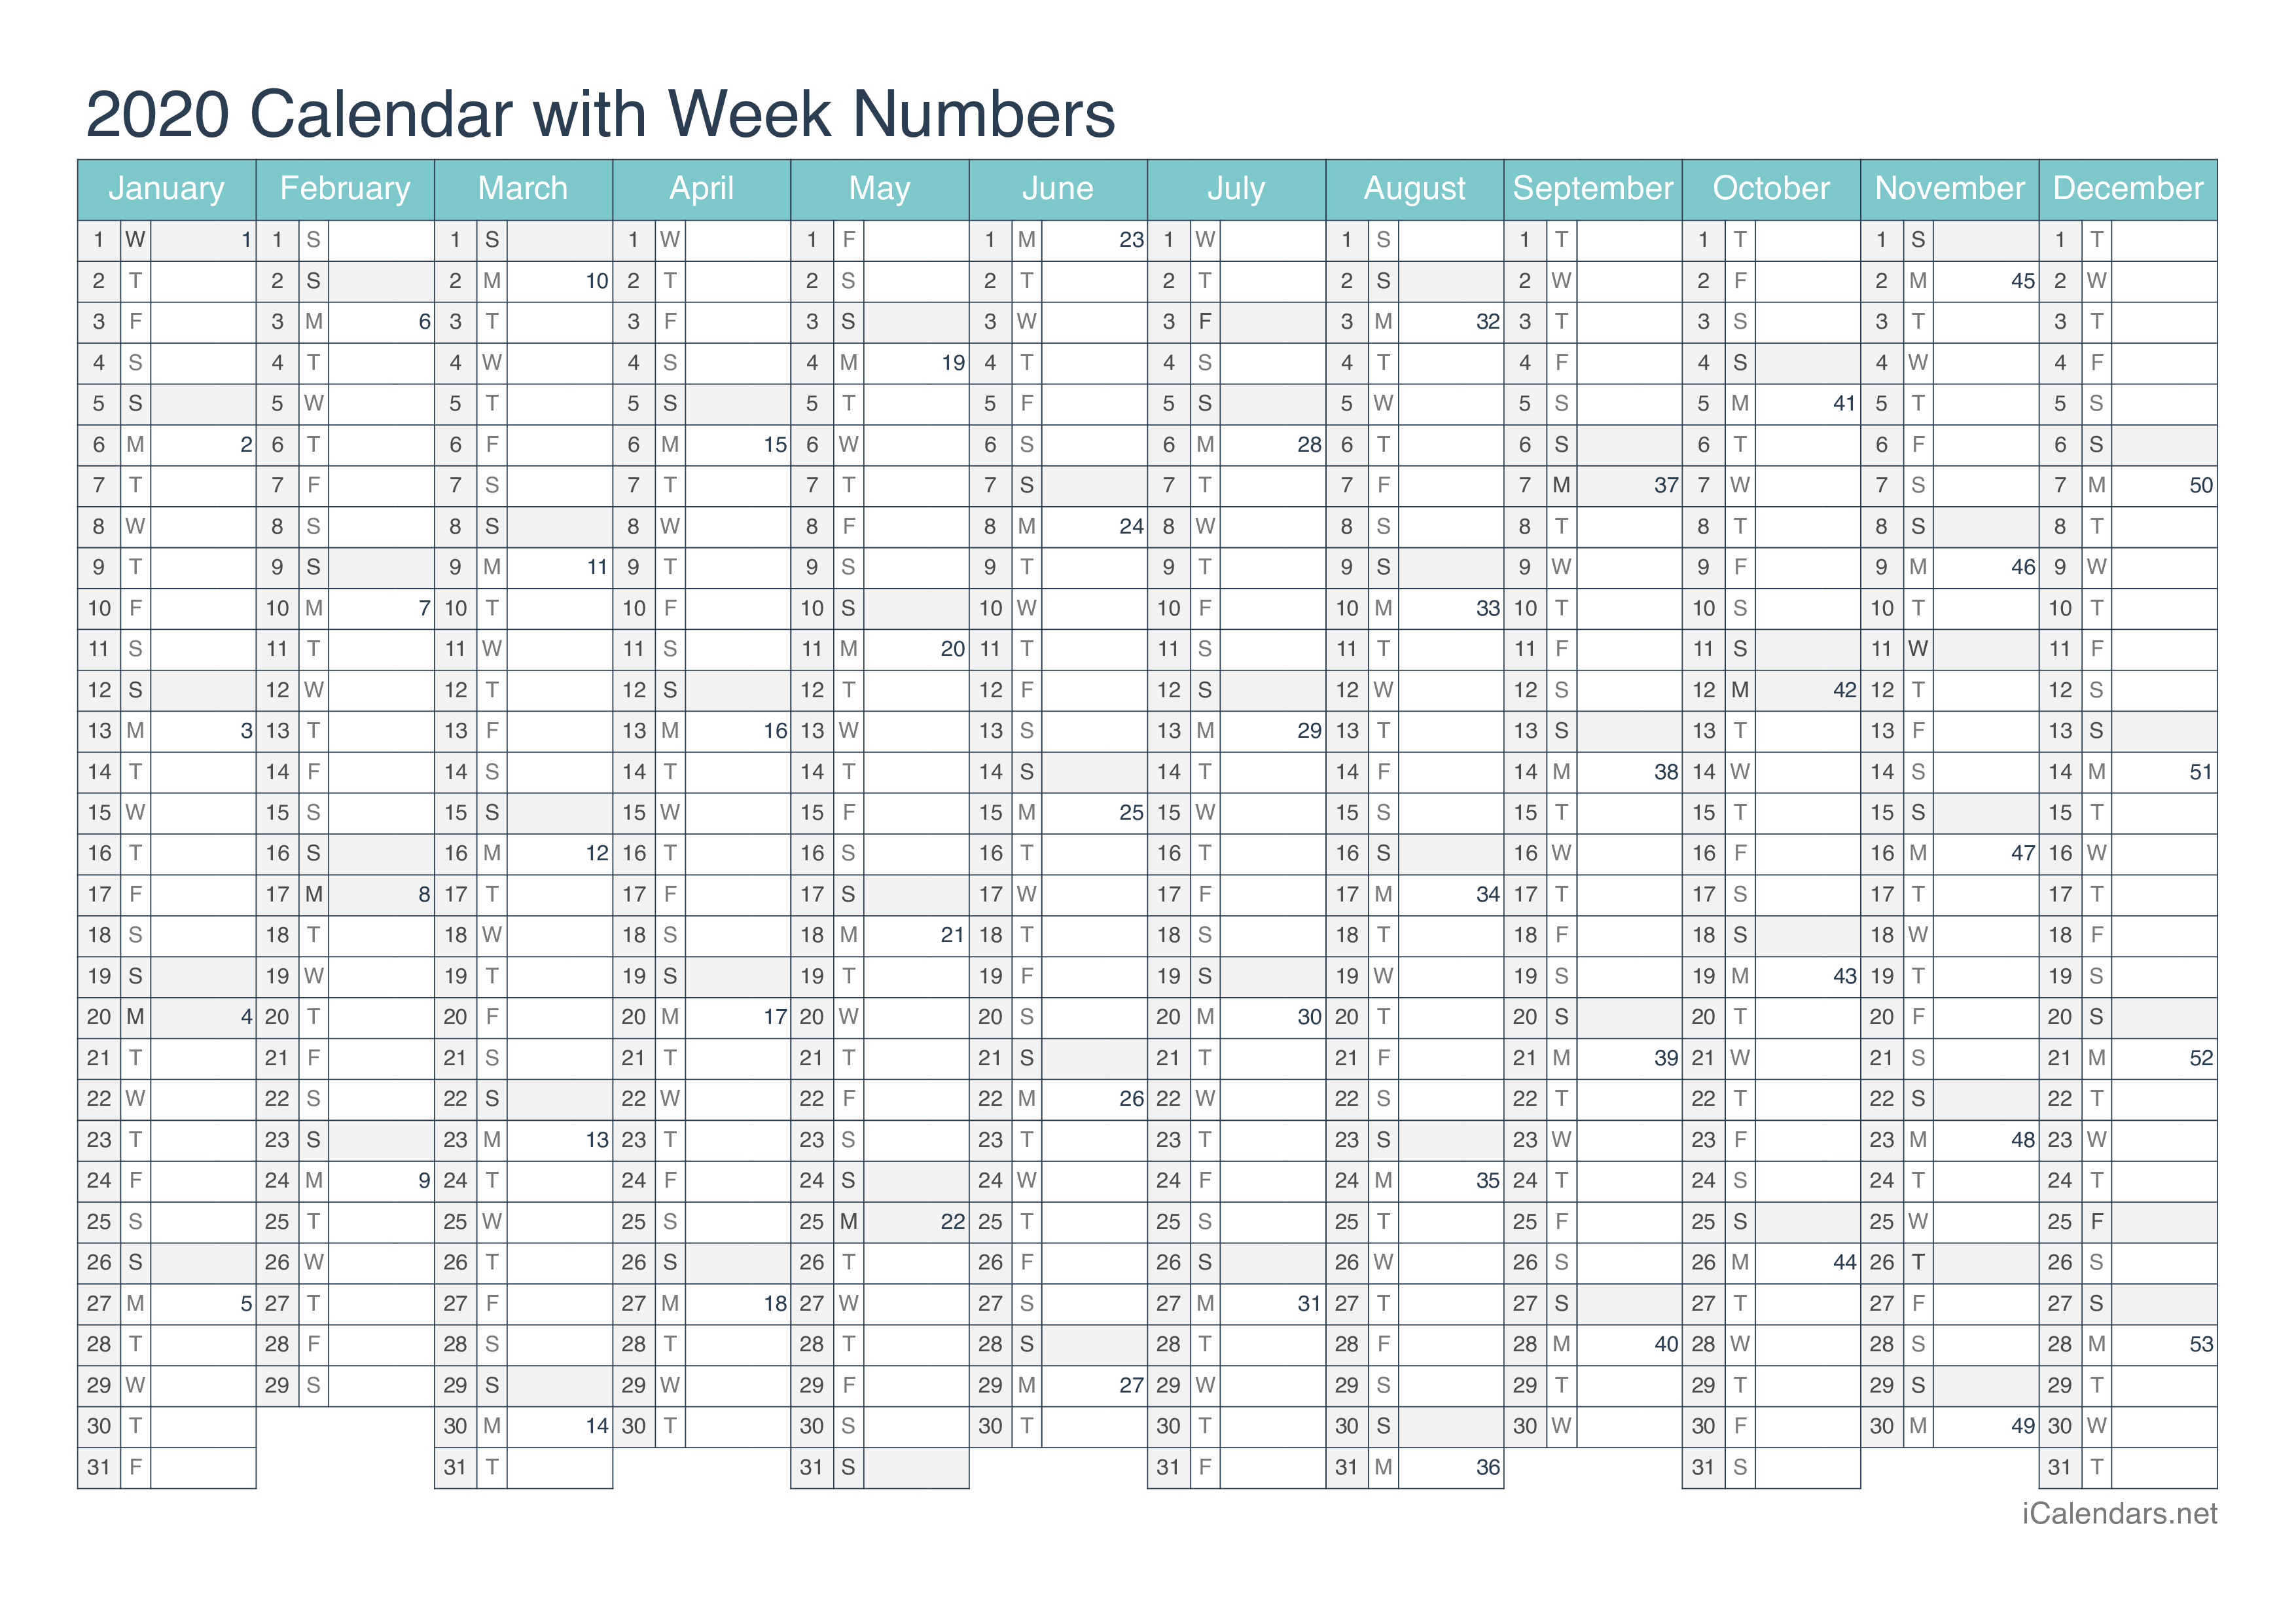 2020 Calendar with week numbers - Turquoise